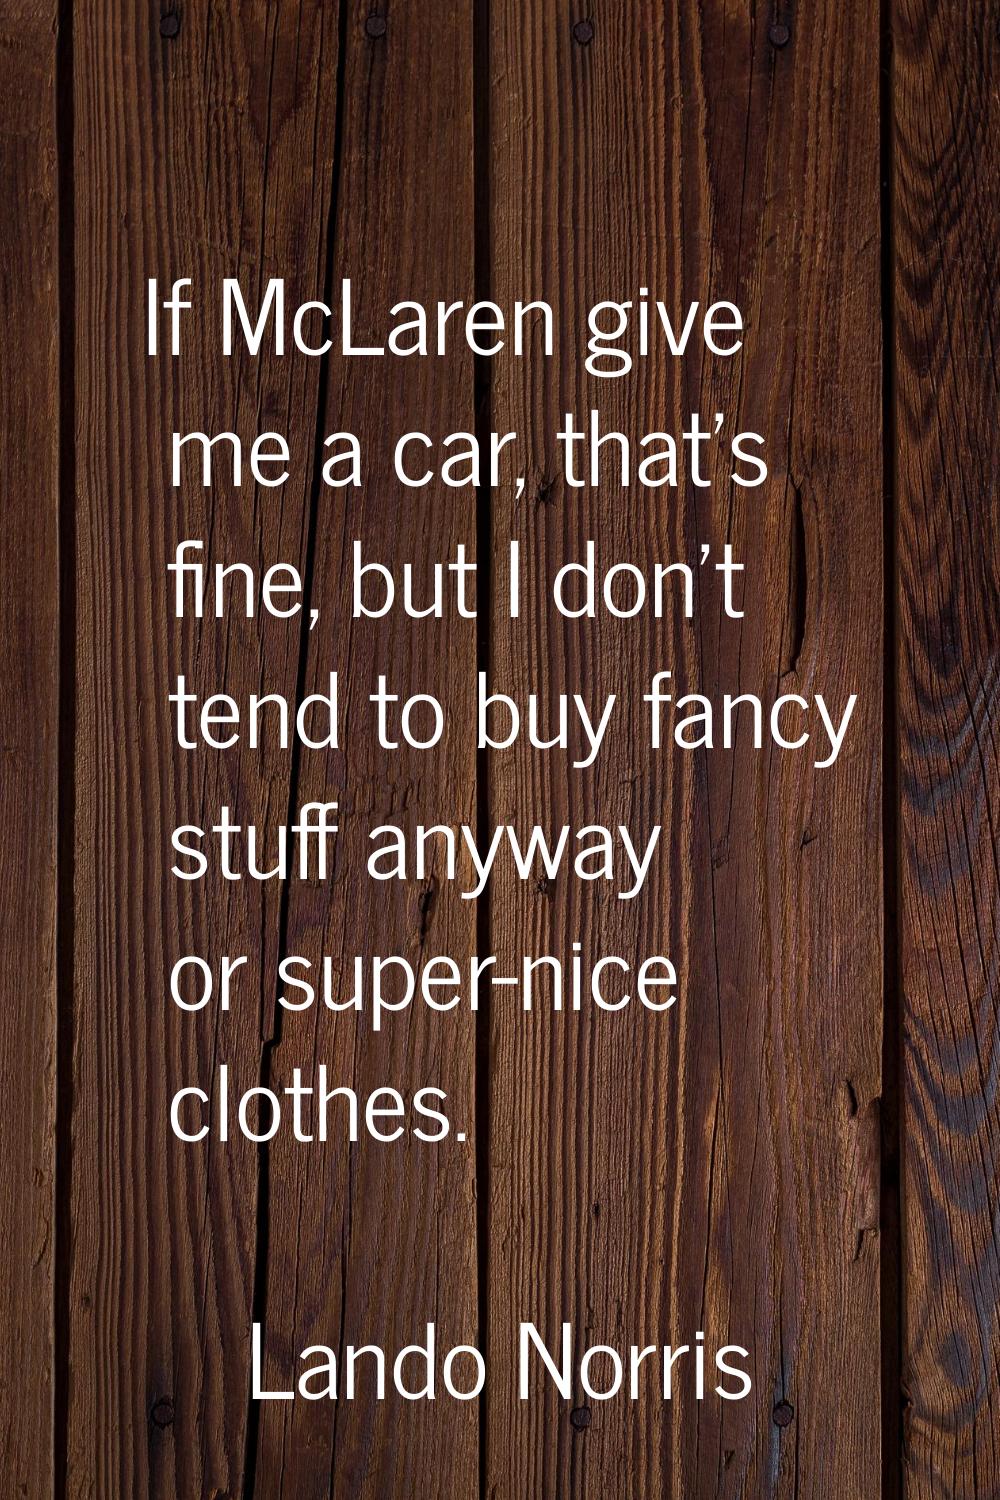 If McLaren give me a car, that's fine, but I don't tend to buy fancy stuff anyway or super-nice clo